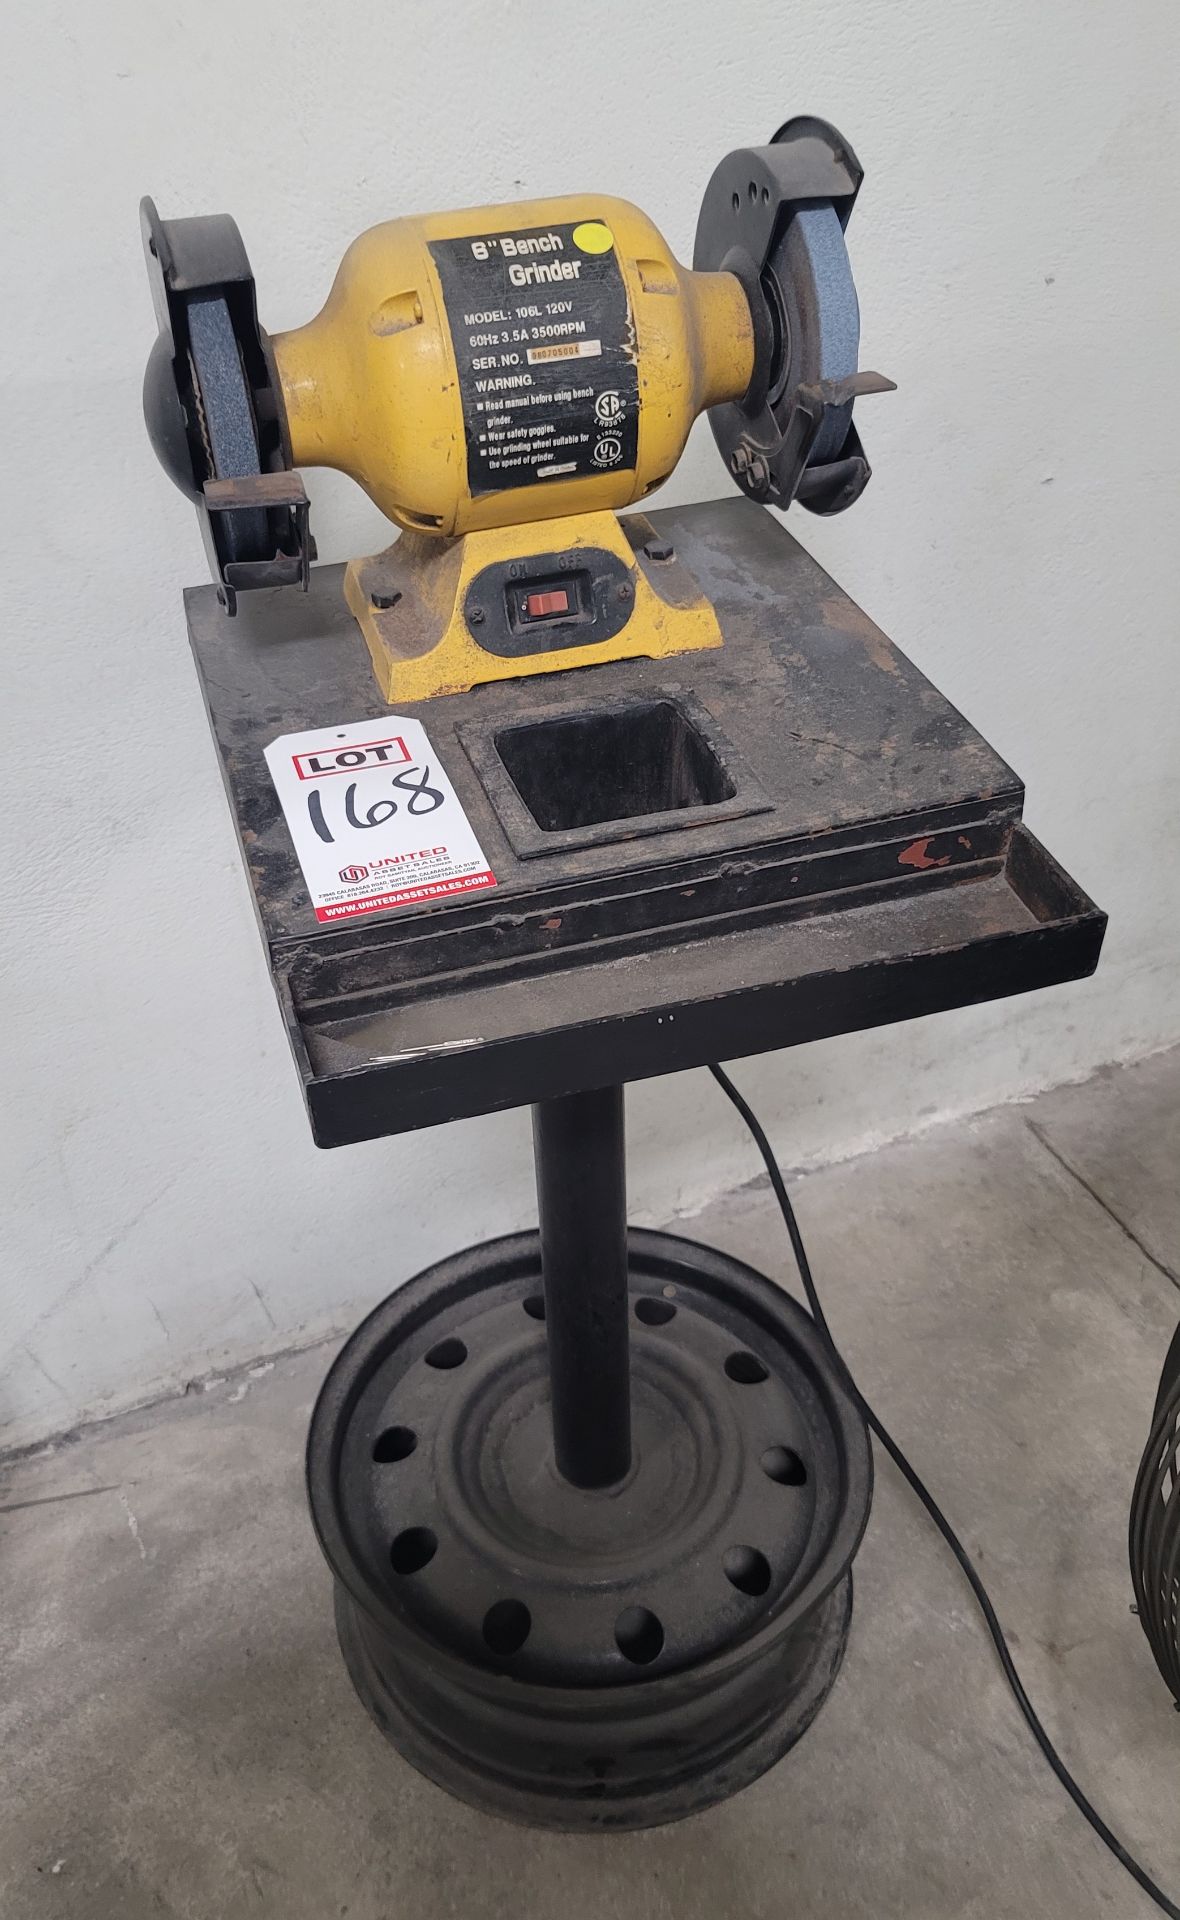 6" BENCH GRINDER, W/ STAND, **IMMEX REGISTERED EQUIPMENT (NEEDS TO RETURN TO THE US) SELLER WILL PAY